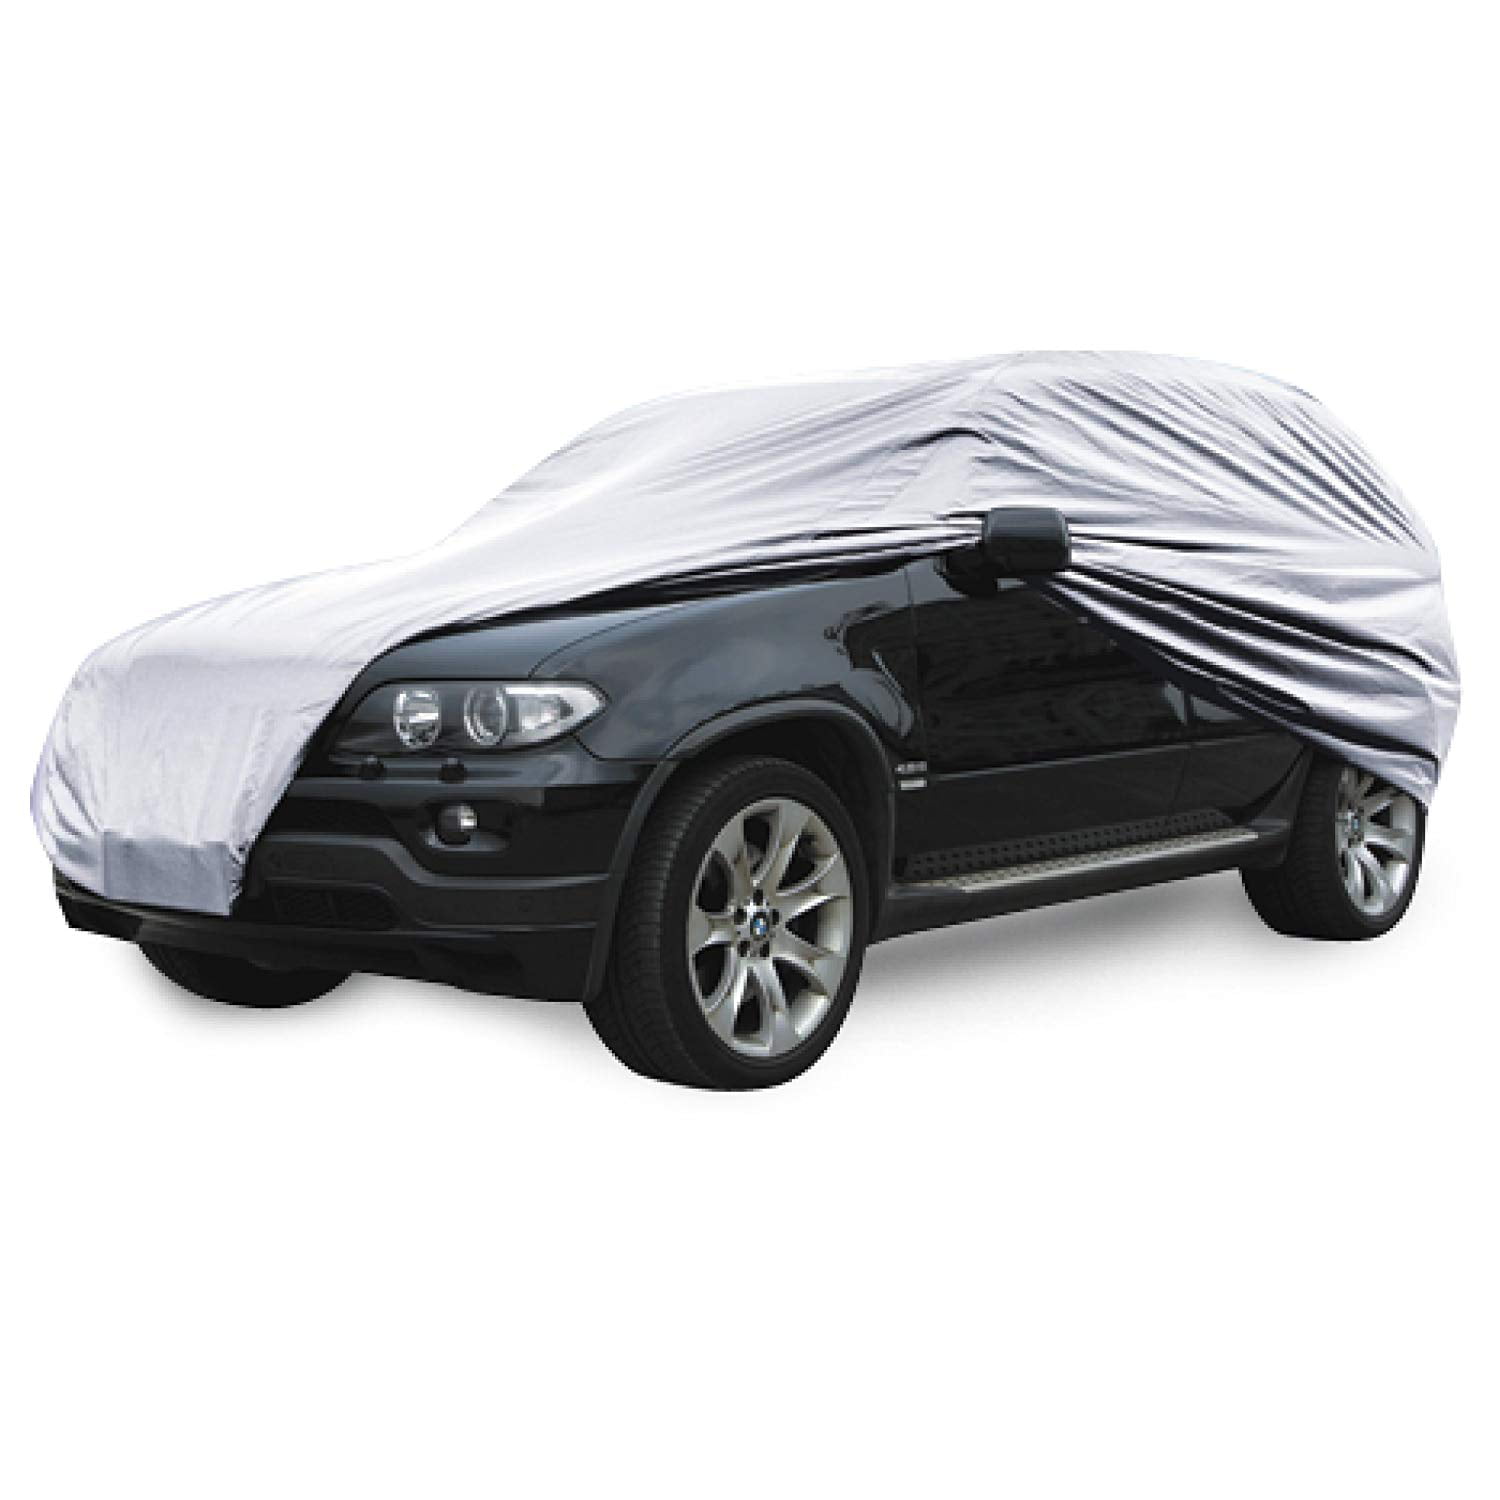 Chevrolet Tahoe 4 Layer Car Cover Fitted In Out door Water Proof Rain Sun Dust 